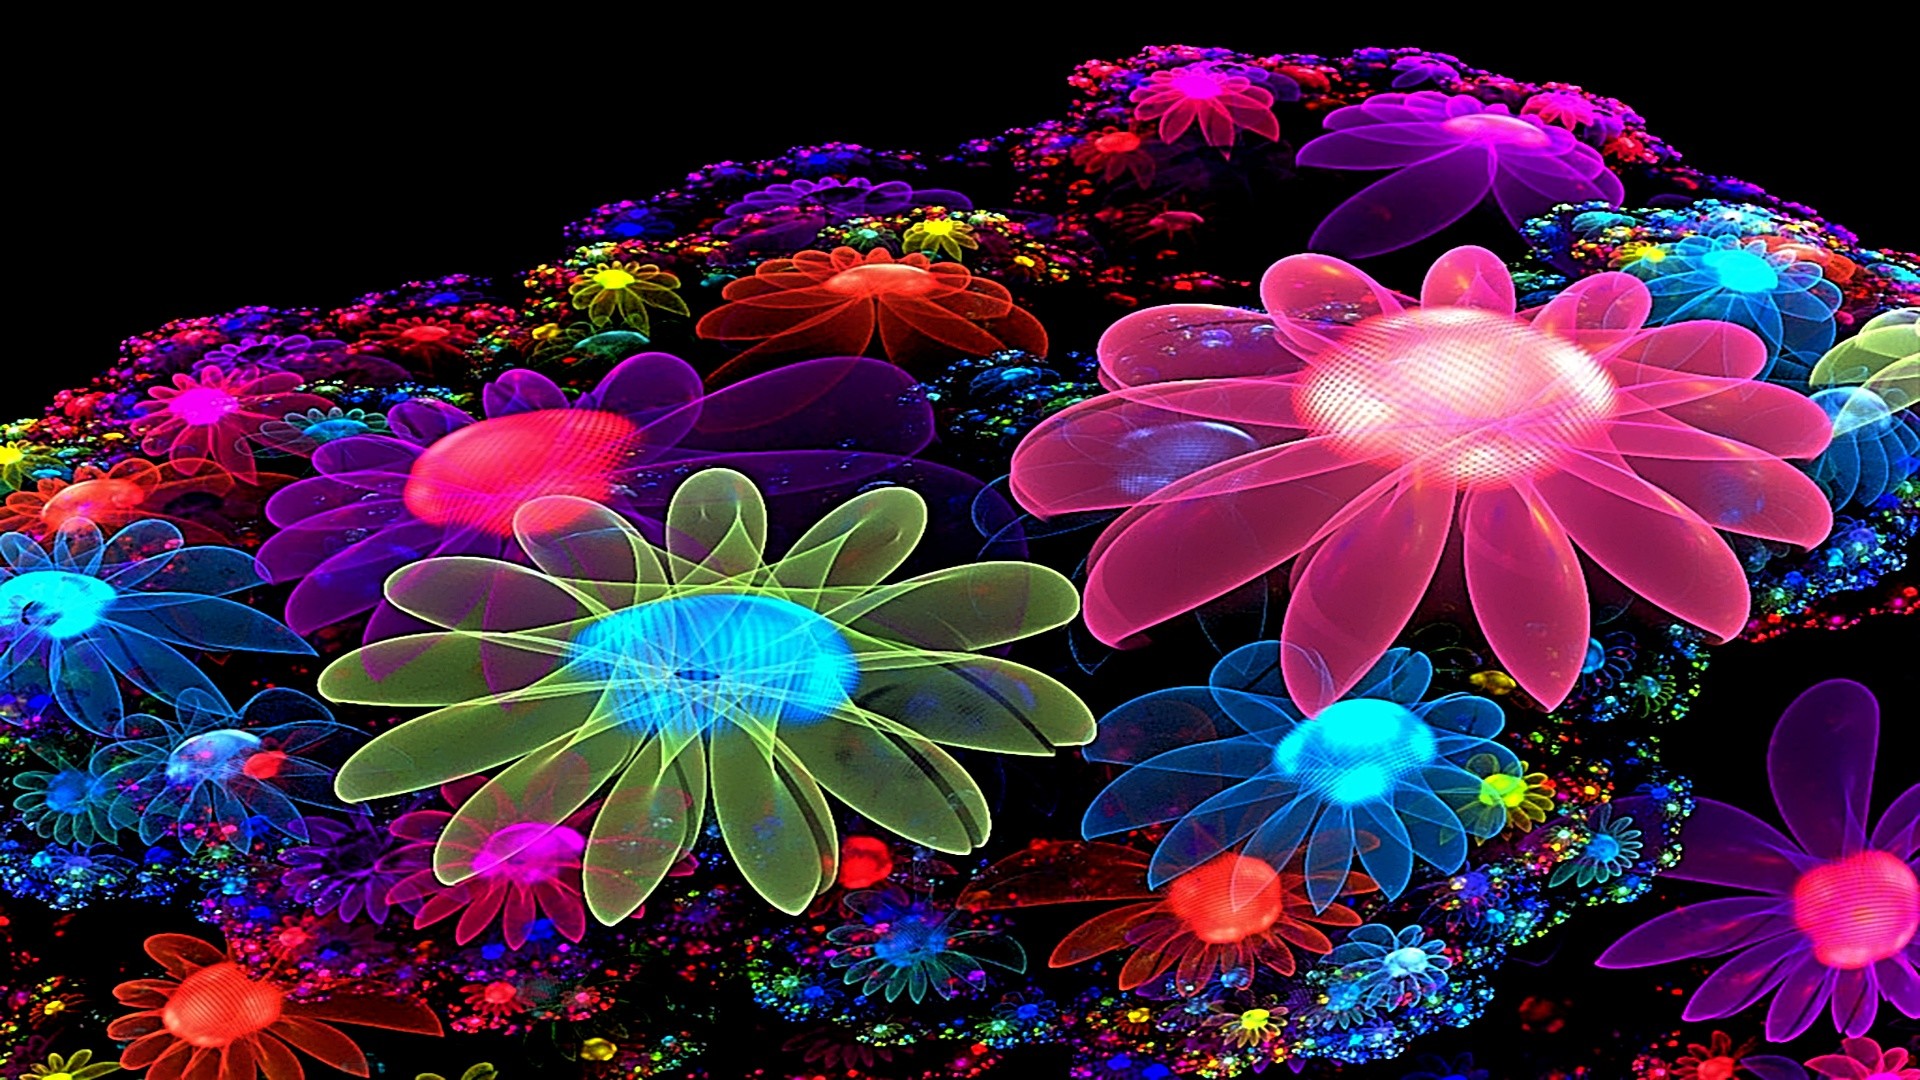 1920x1080 Awesome Colorful Pictures and Wallpapers Colorful Wallpapers For Desktop  Wallpapers)